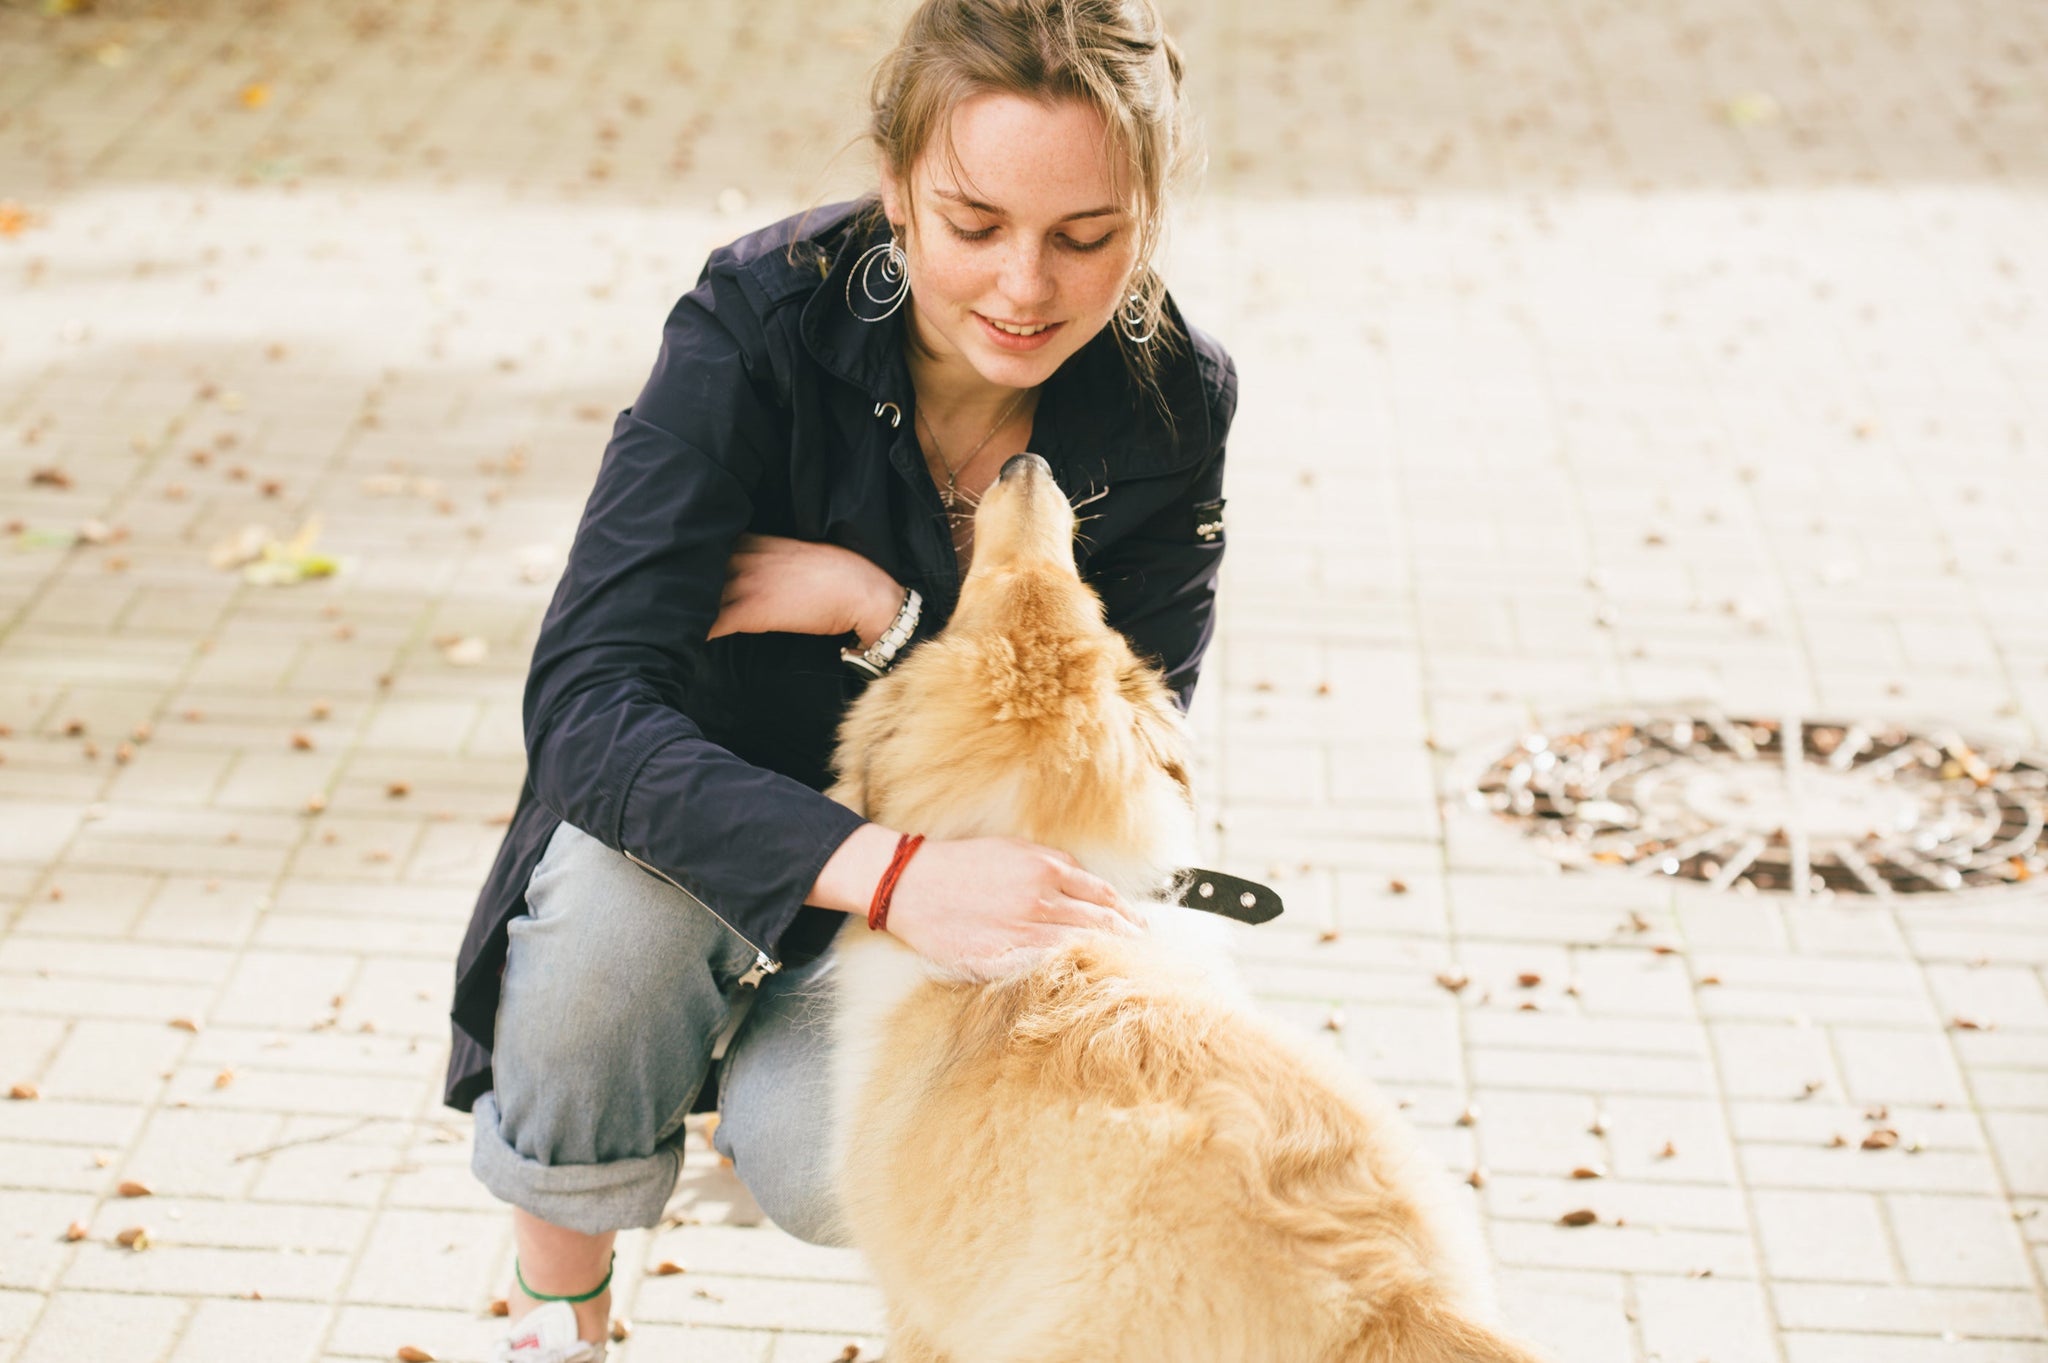 The Impact of Assistance Dogs on the Quality of Life of People with Special Needs